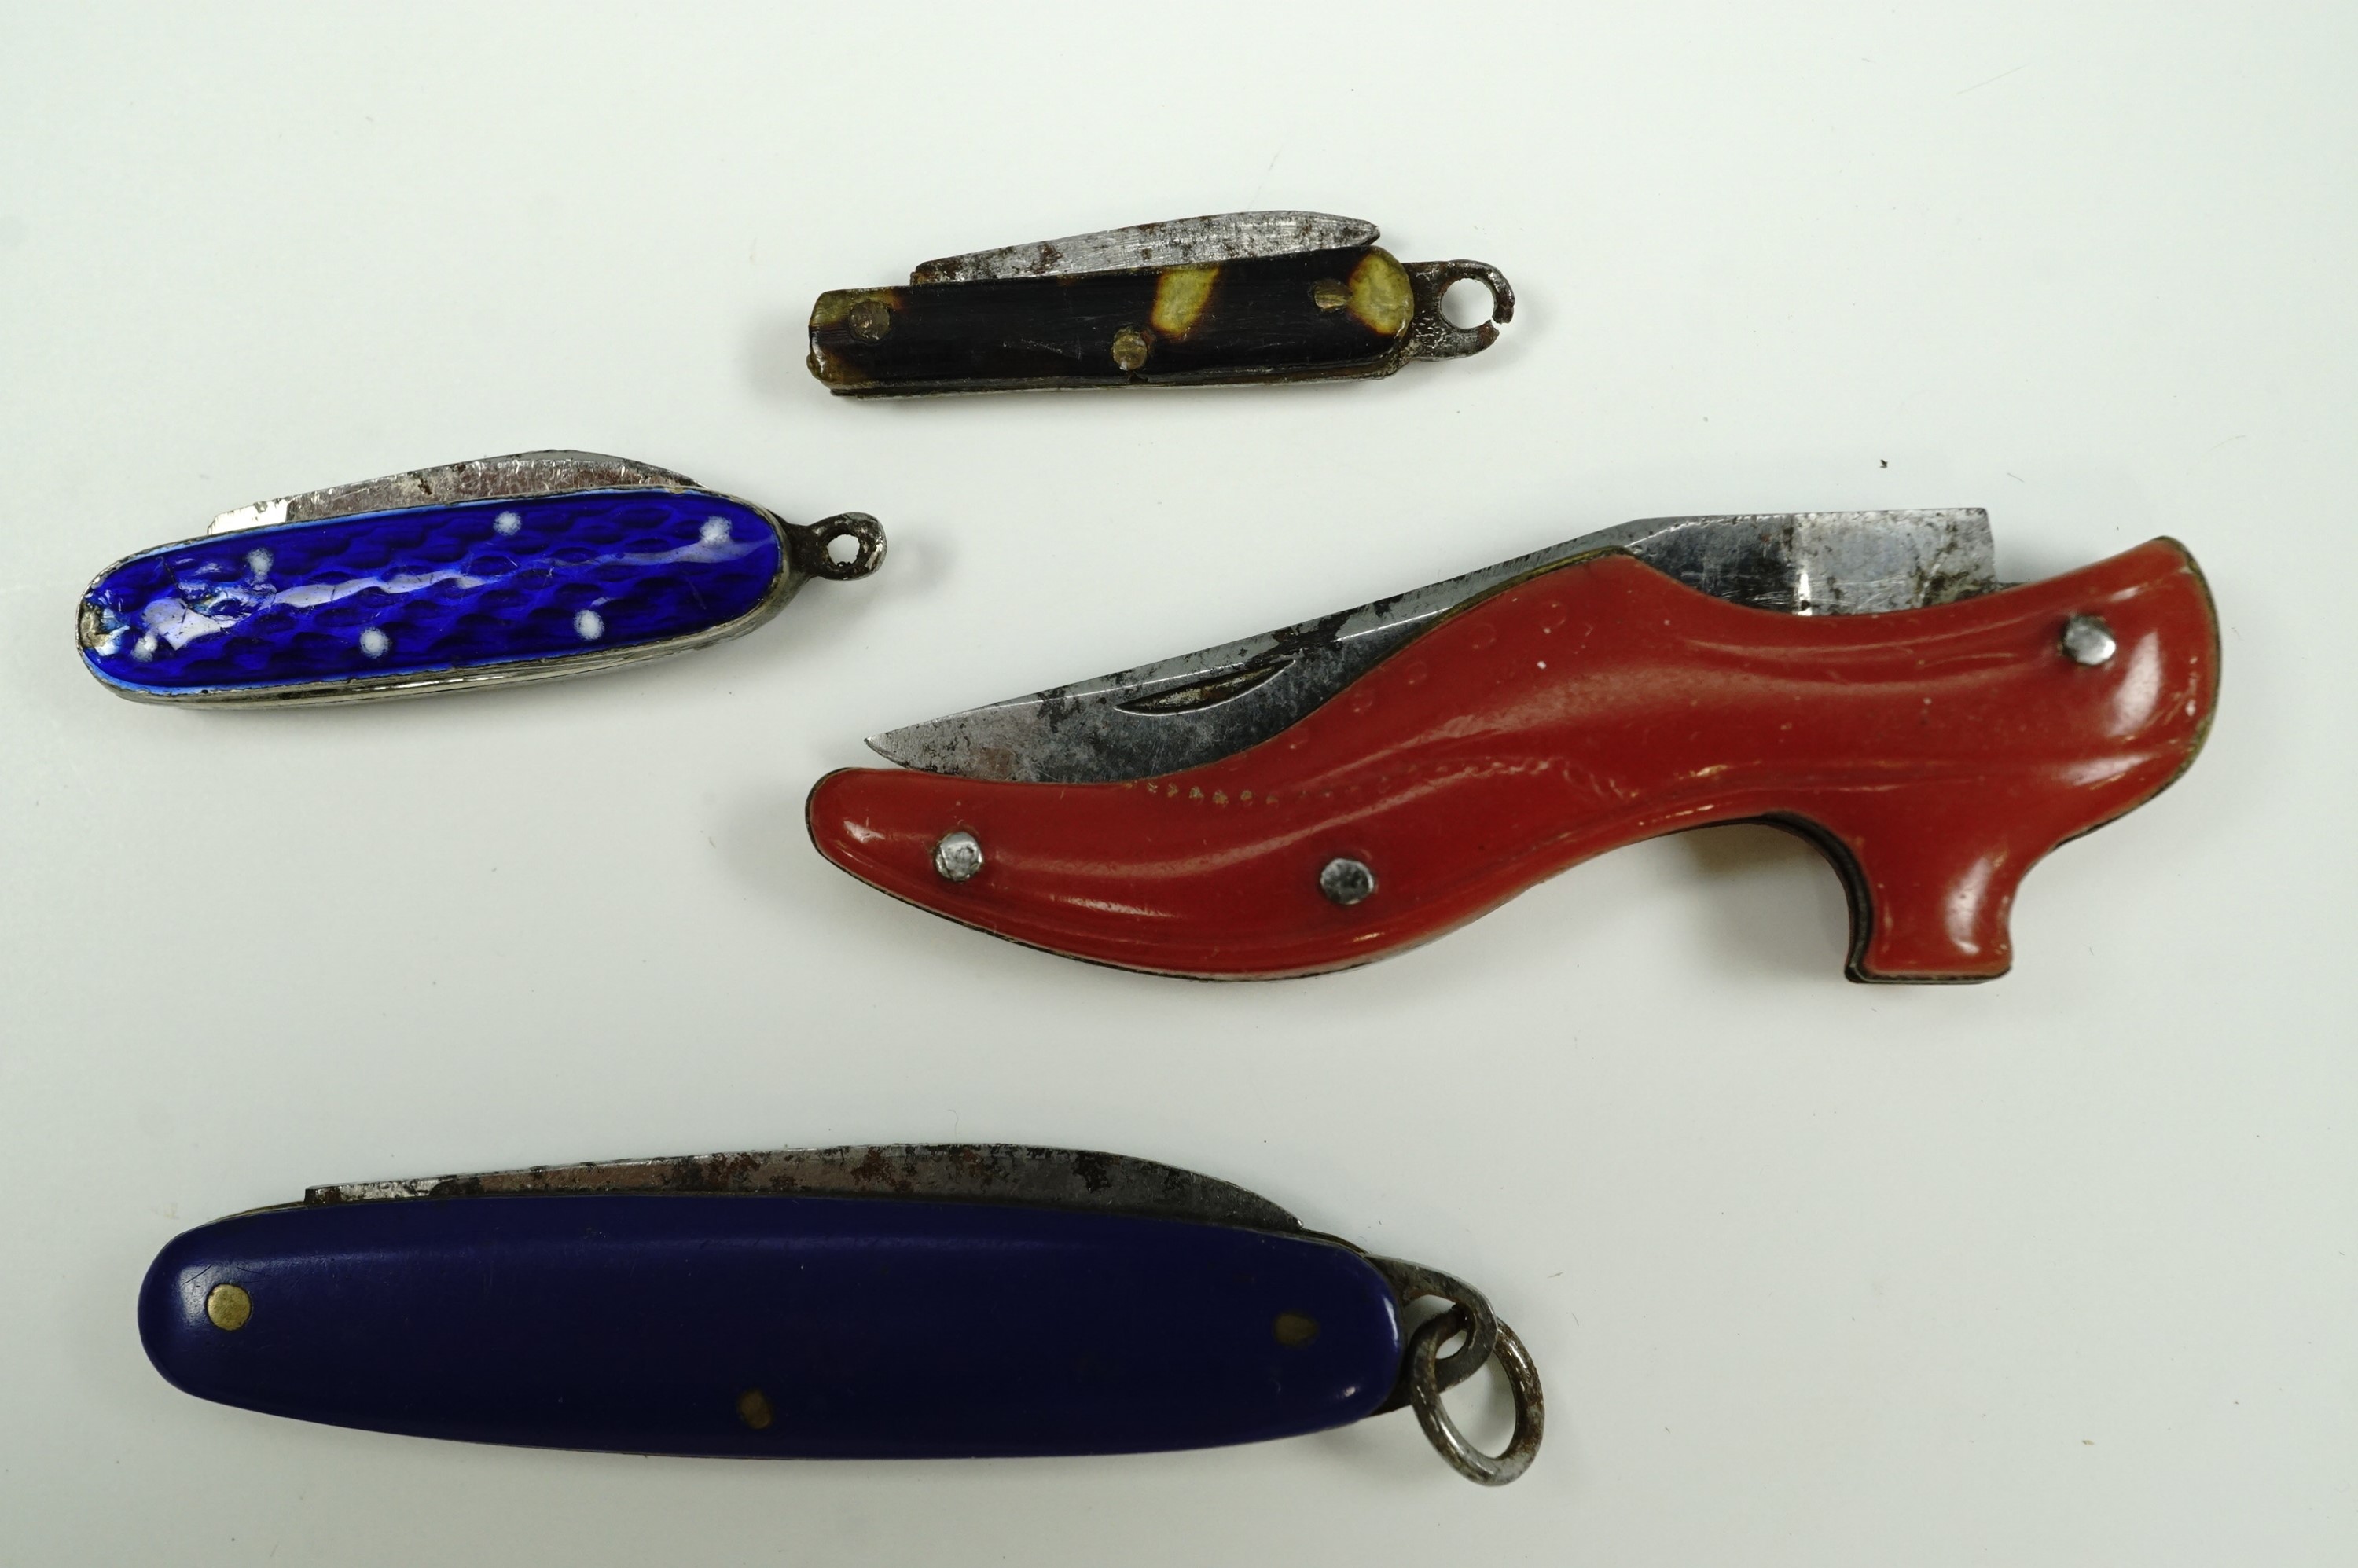 A novelty miniature penknife in the form of a lady's shoe with red plastic grip scales, 5 cm long